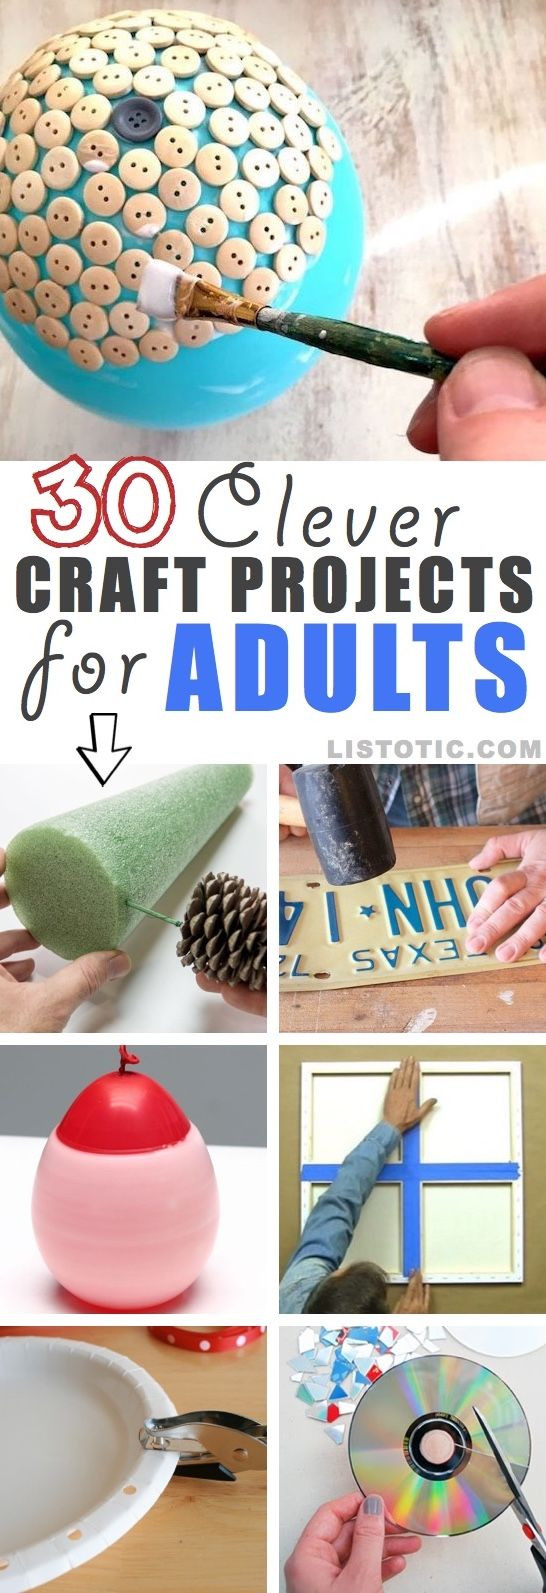 New Craft Ideas For Adults
 best EVERYTHING DIY images on Pinterest